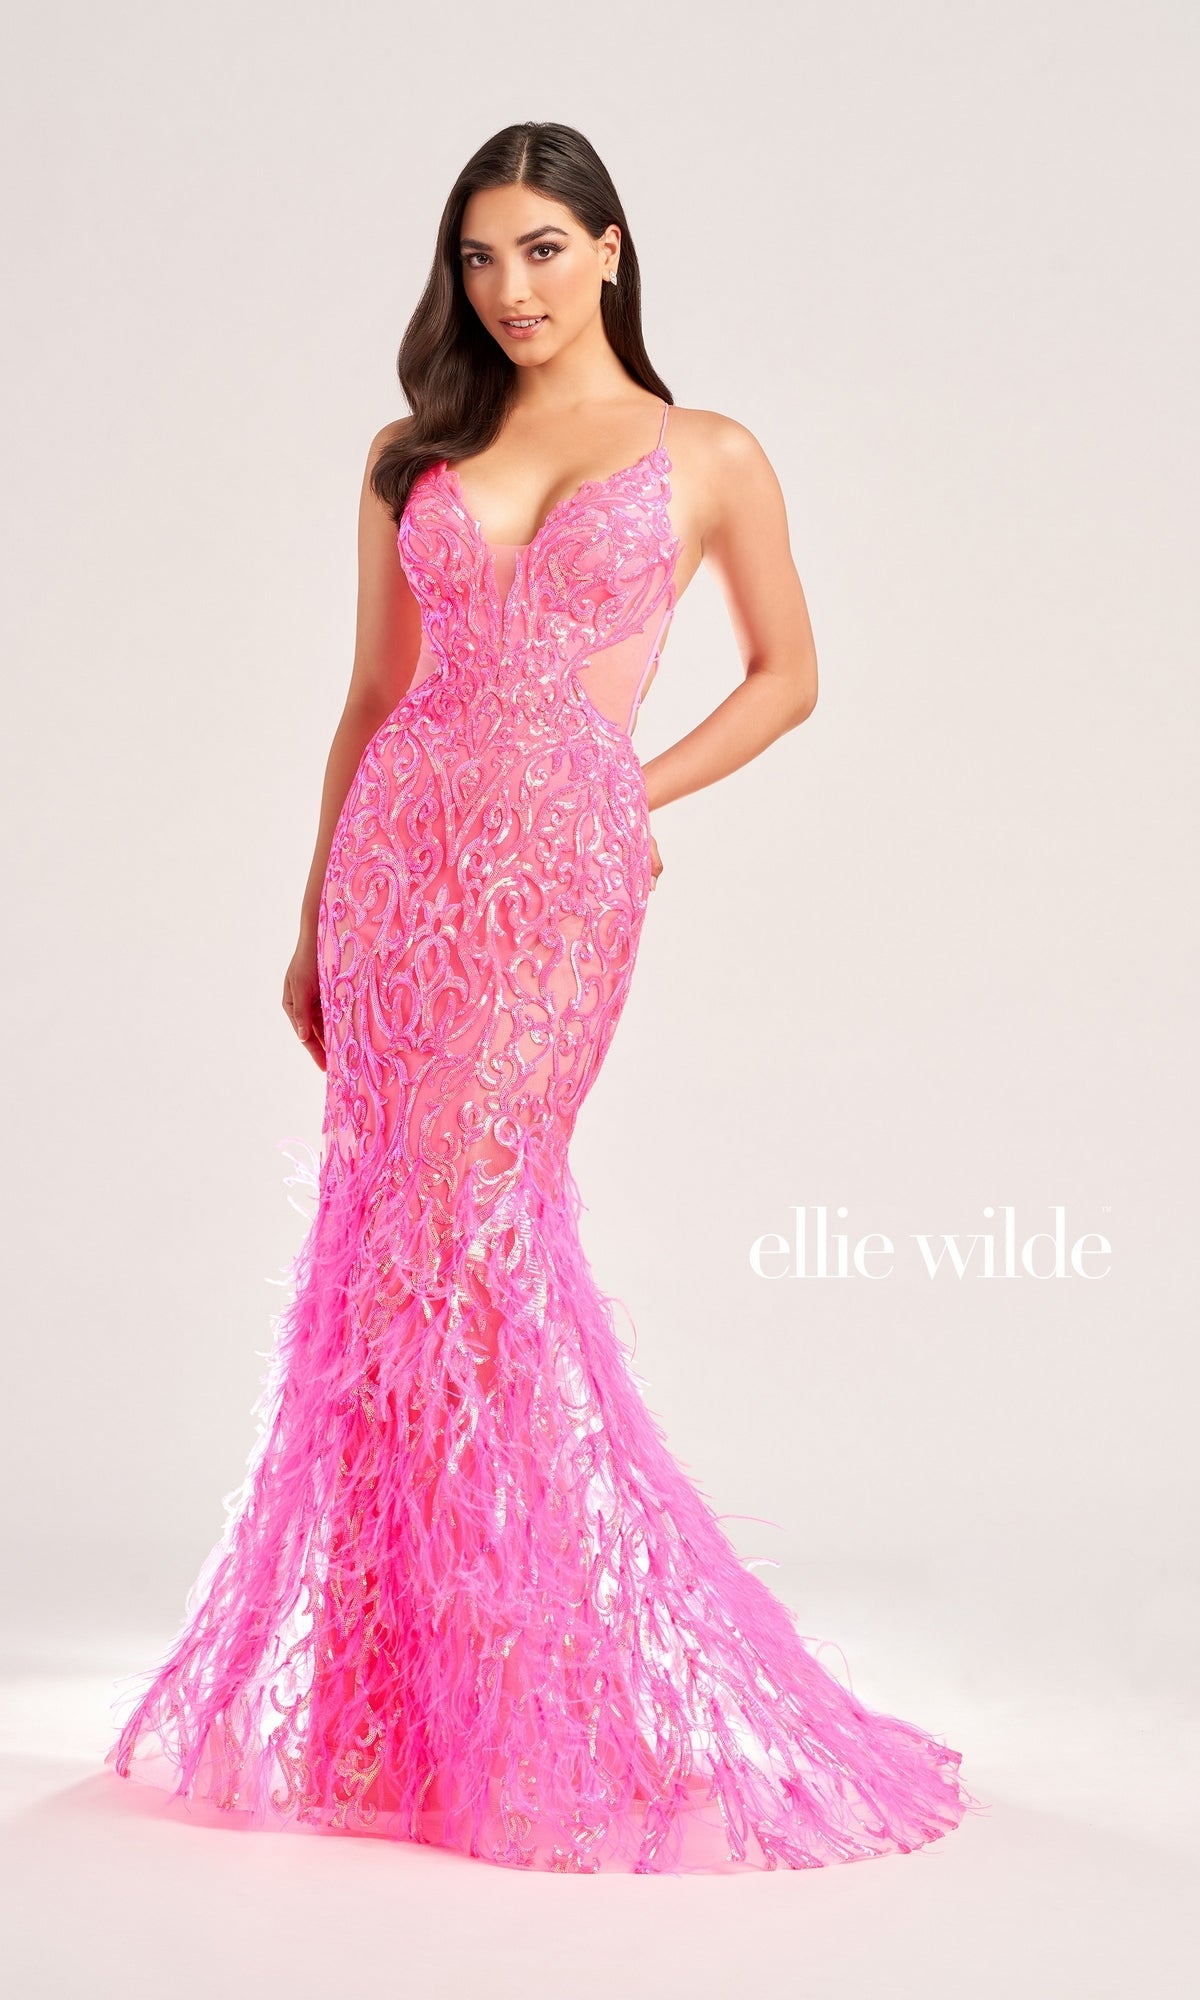 Long Designer Prom Dress with Feathers - PromGirl